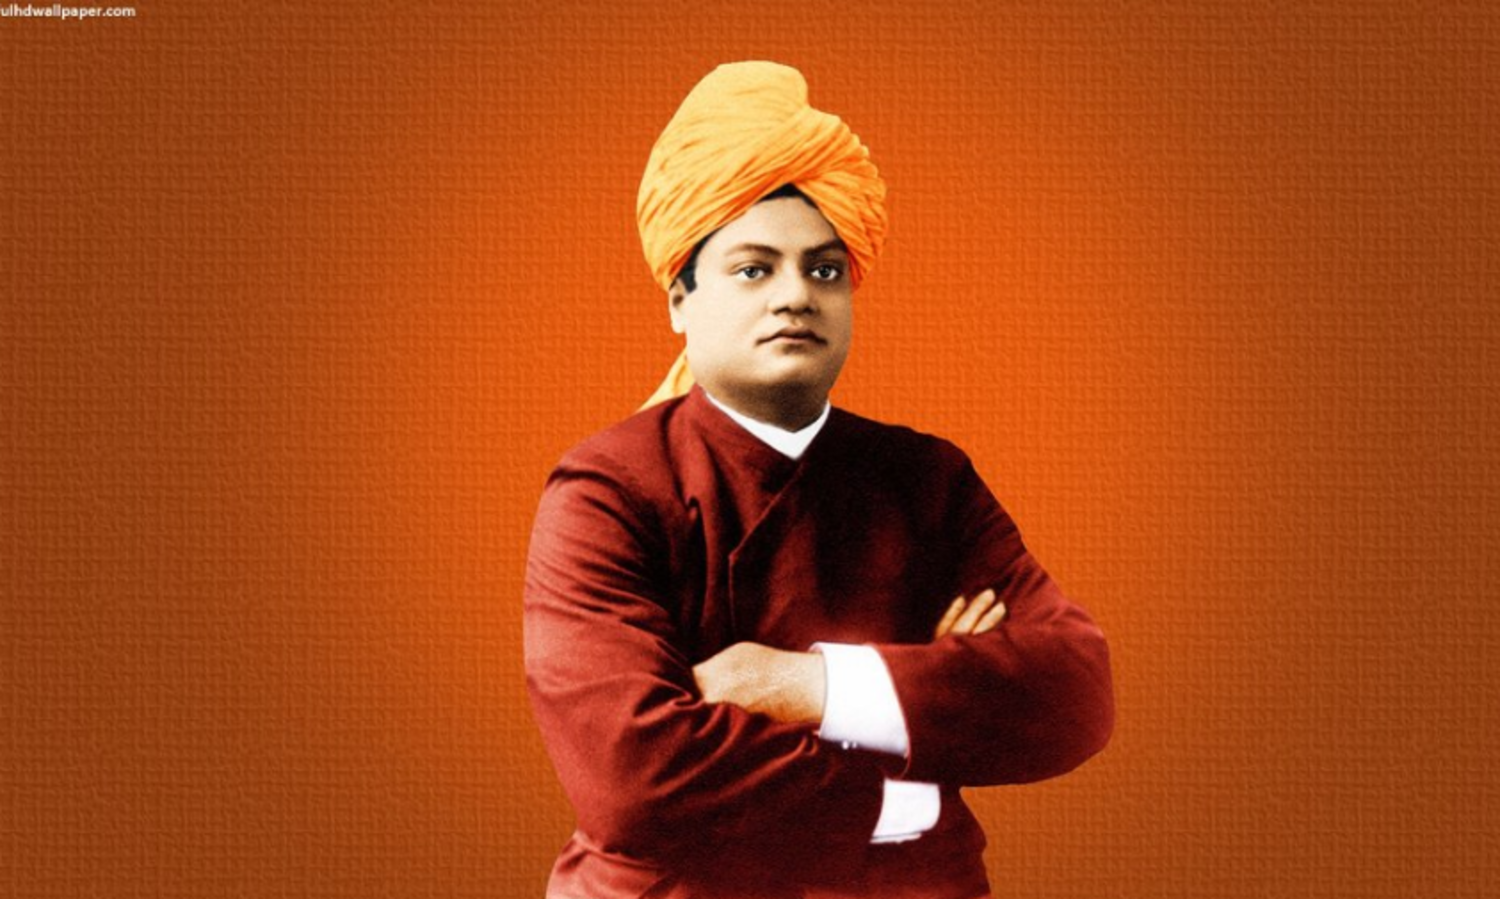 Sisters and Brothers of America: Swami Vivekananda historic speech in 1893